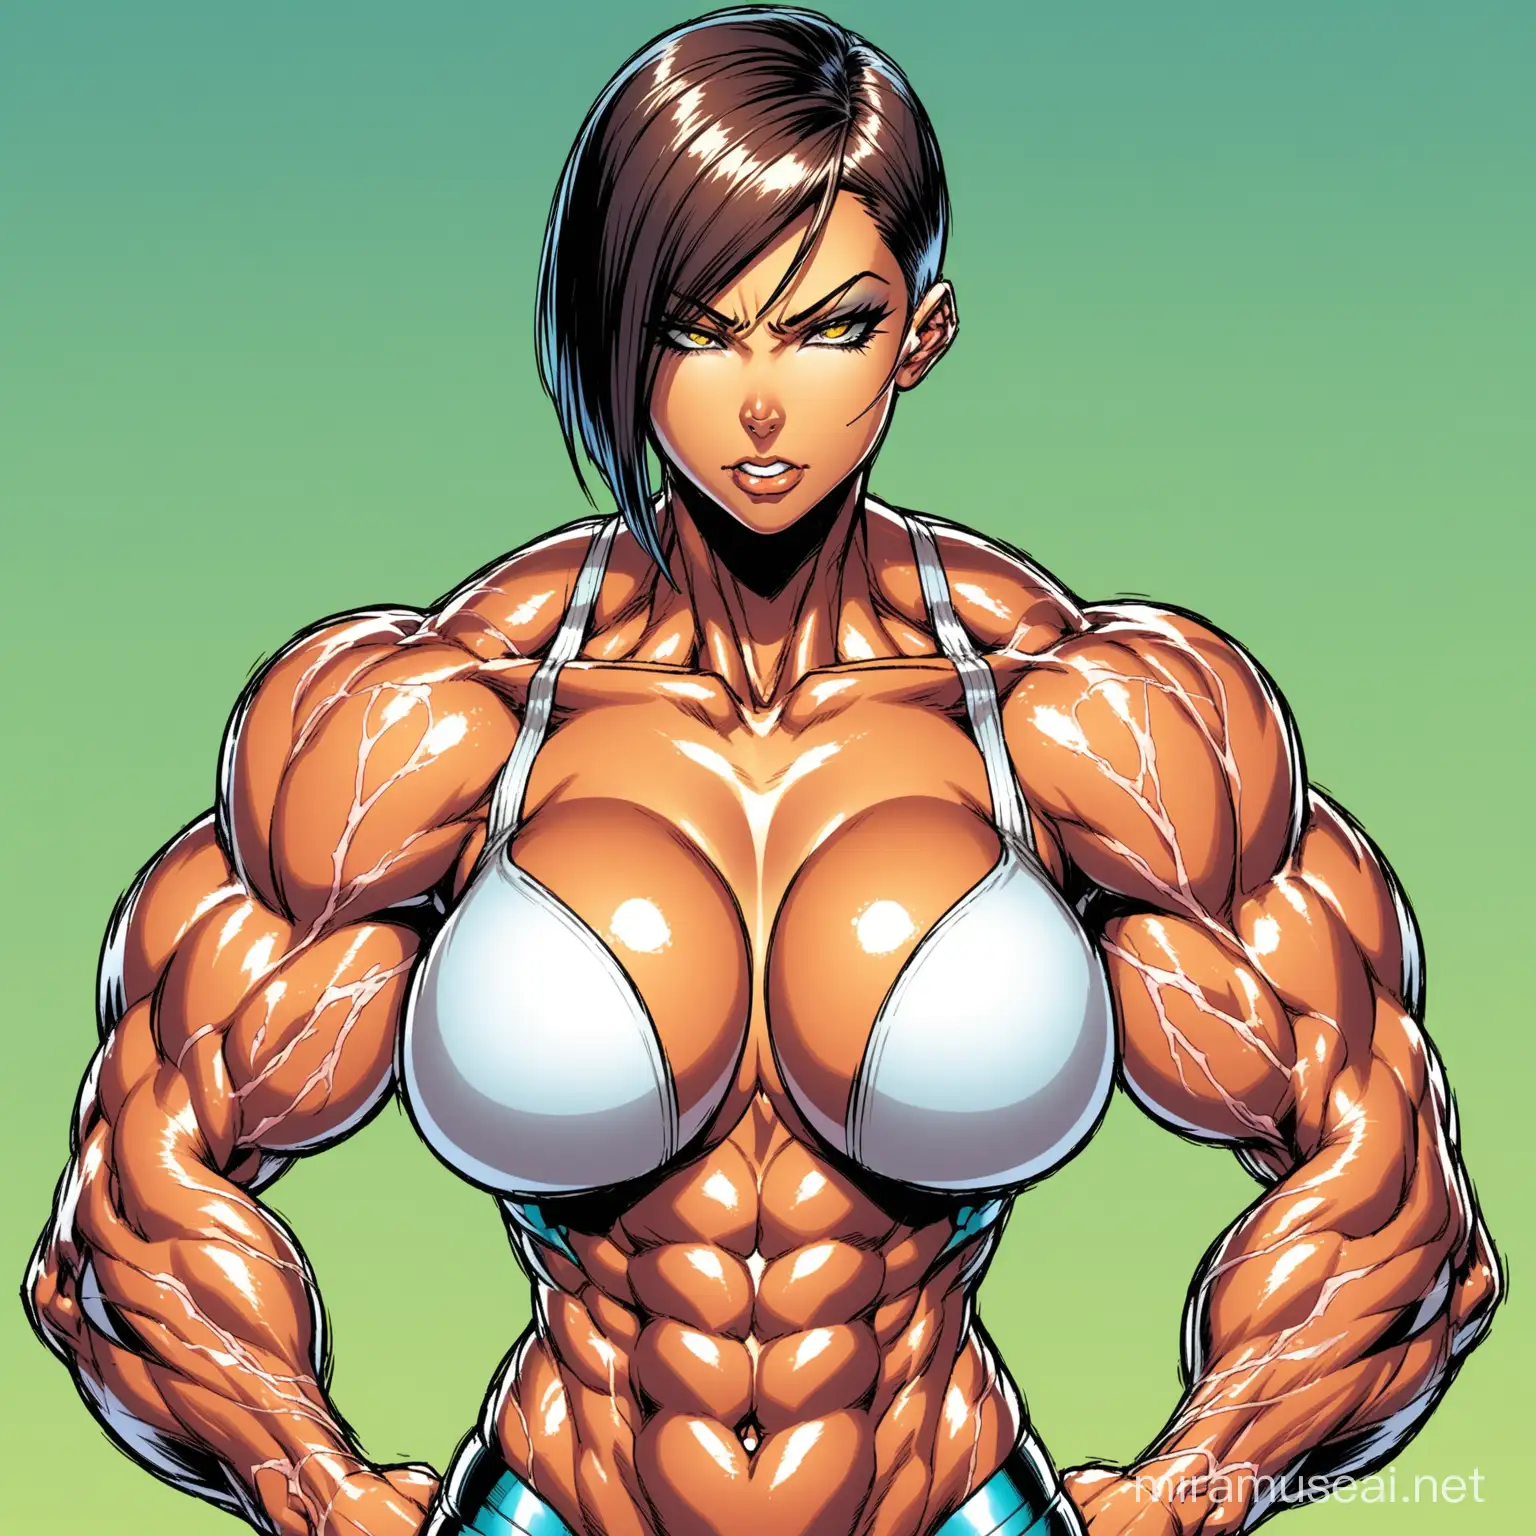 Powerful Cyborg Woman Flexing Muscles in Comic Book Style